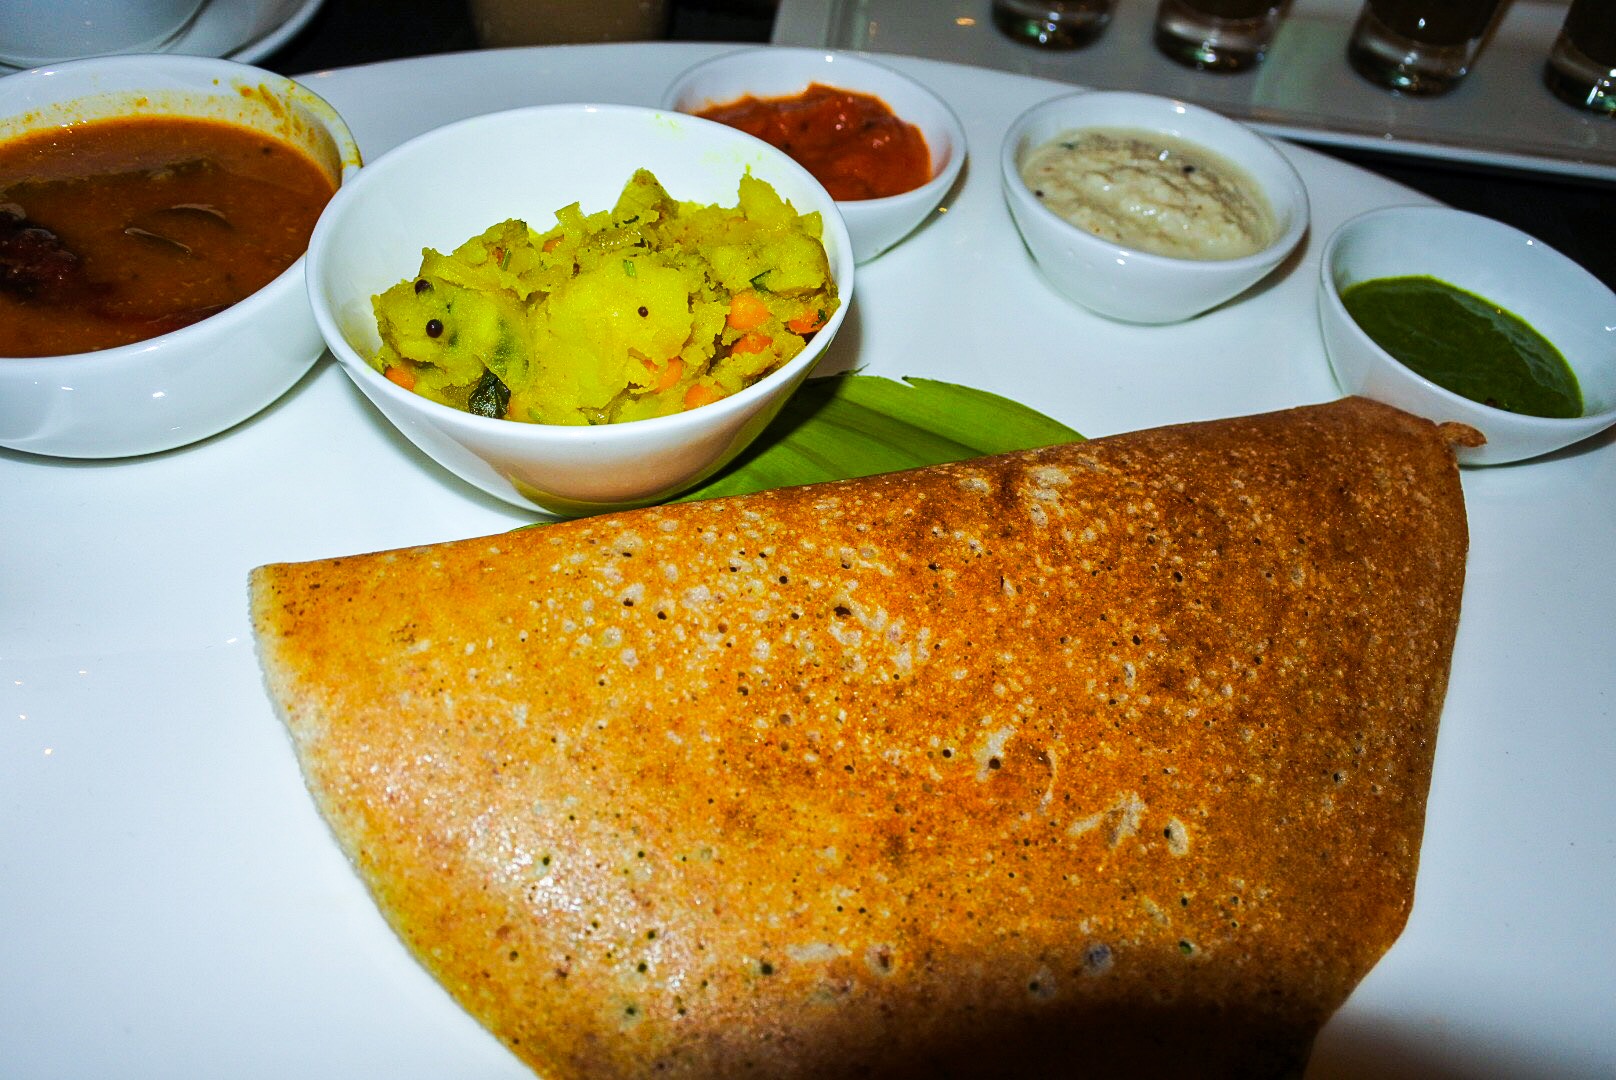 I can't remember when I have last enjoyed a dosa outside quite this much